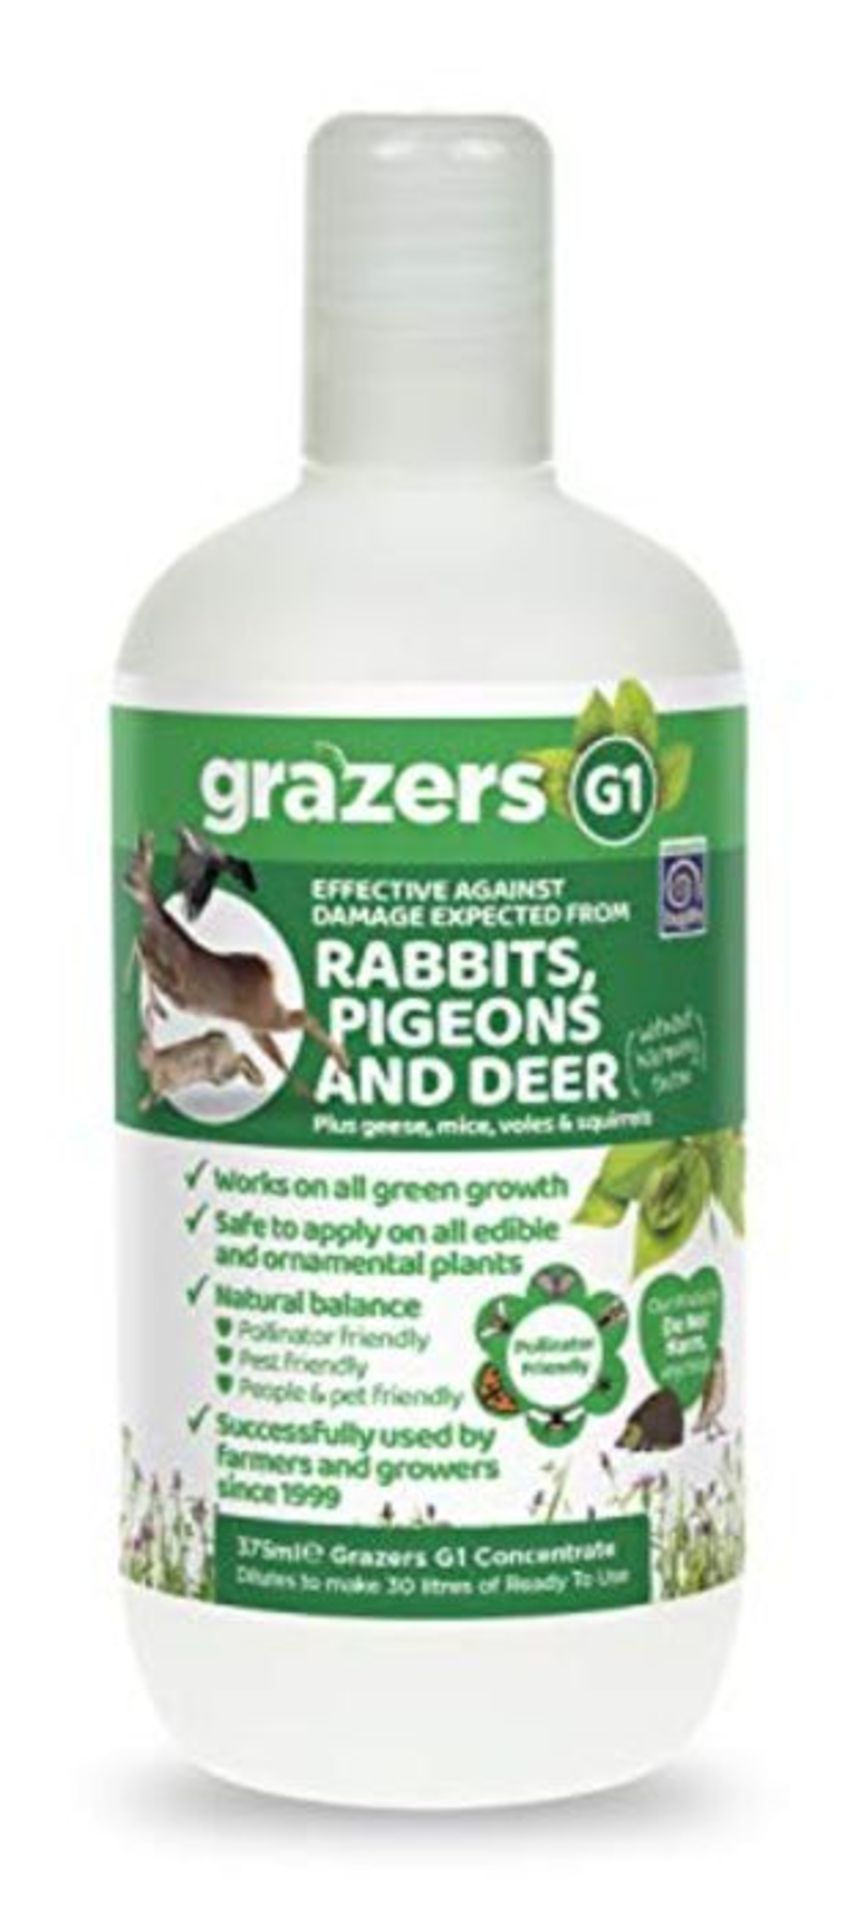 Grazers ltd GRAZERS G1 Concentrate 750ml Effective Against Damage from Rabbits, Pigeon - Image 3 of 4